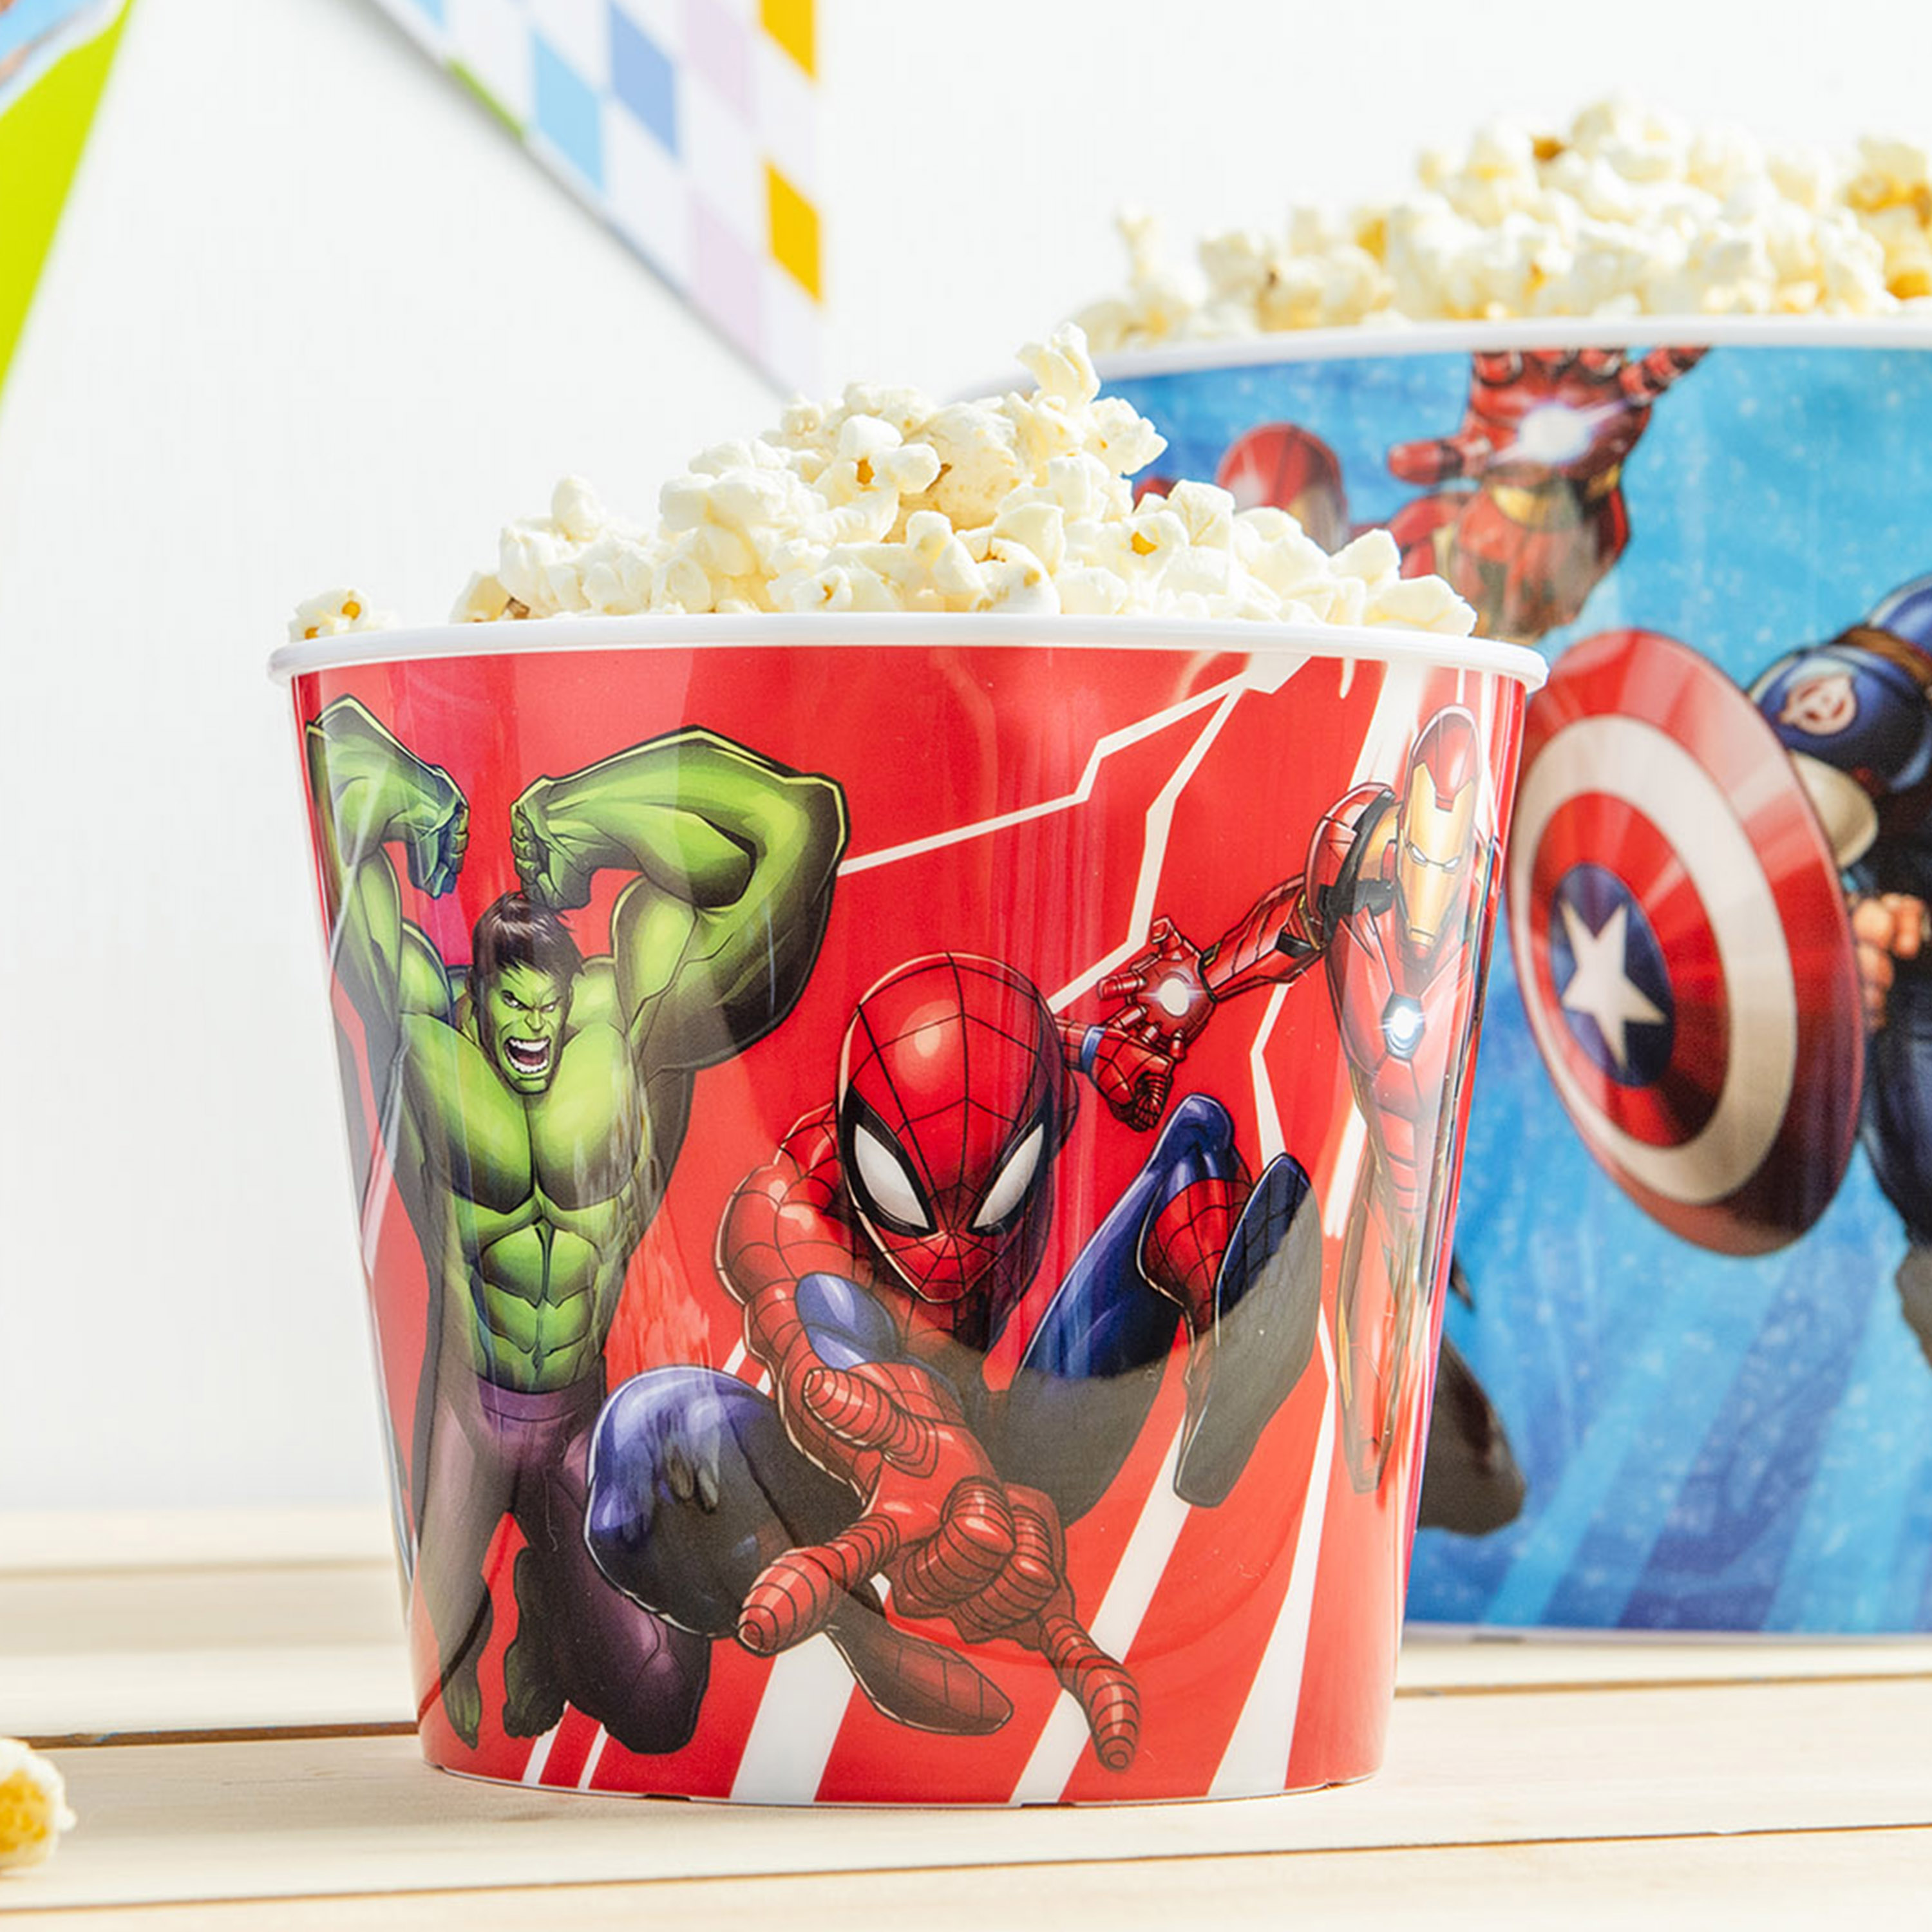 Marvel Comics Plastic Popcorn Container and Bowls, The Hulk, Spider-Man and More, 5-piece set slideshow image 4